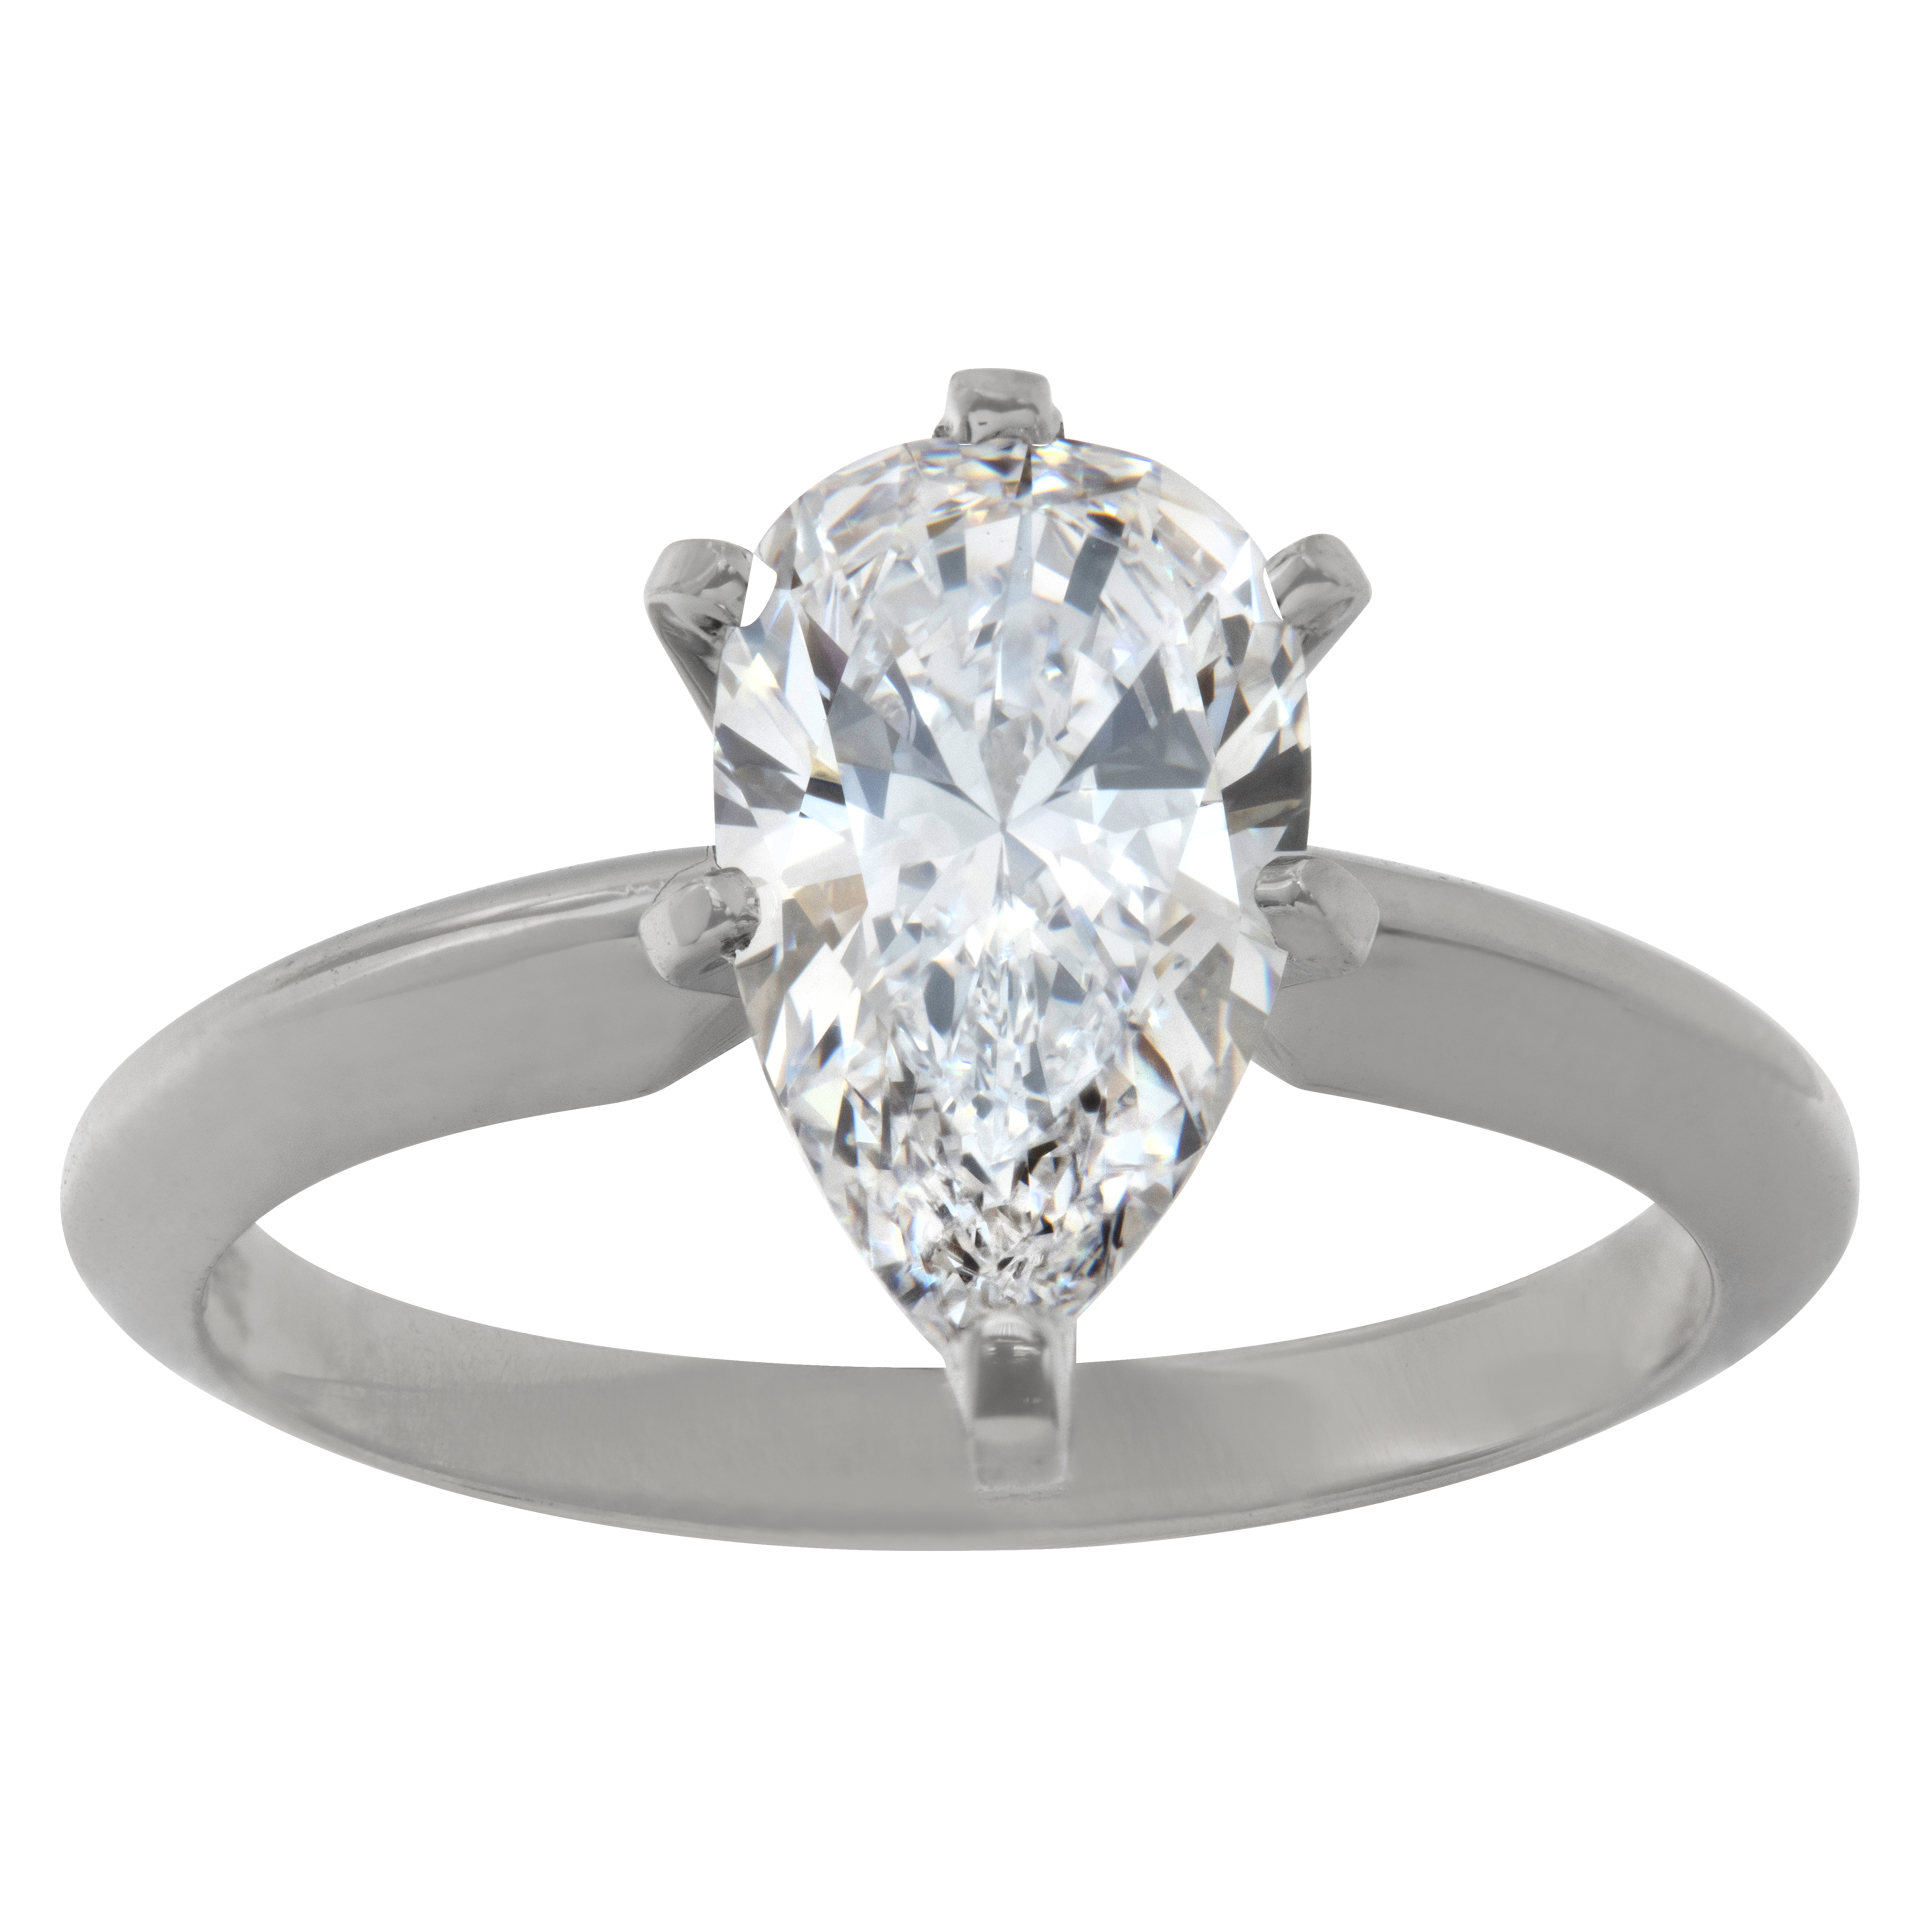 GIA certified pear brilliant cut 1.52 carat diamond (D color, SI1 clarity, Excellent polish) ring